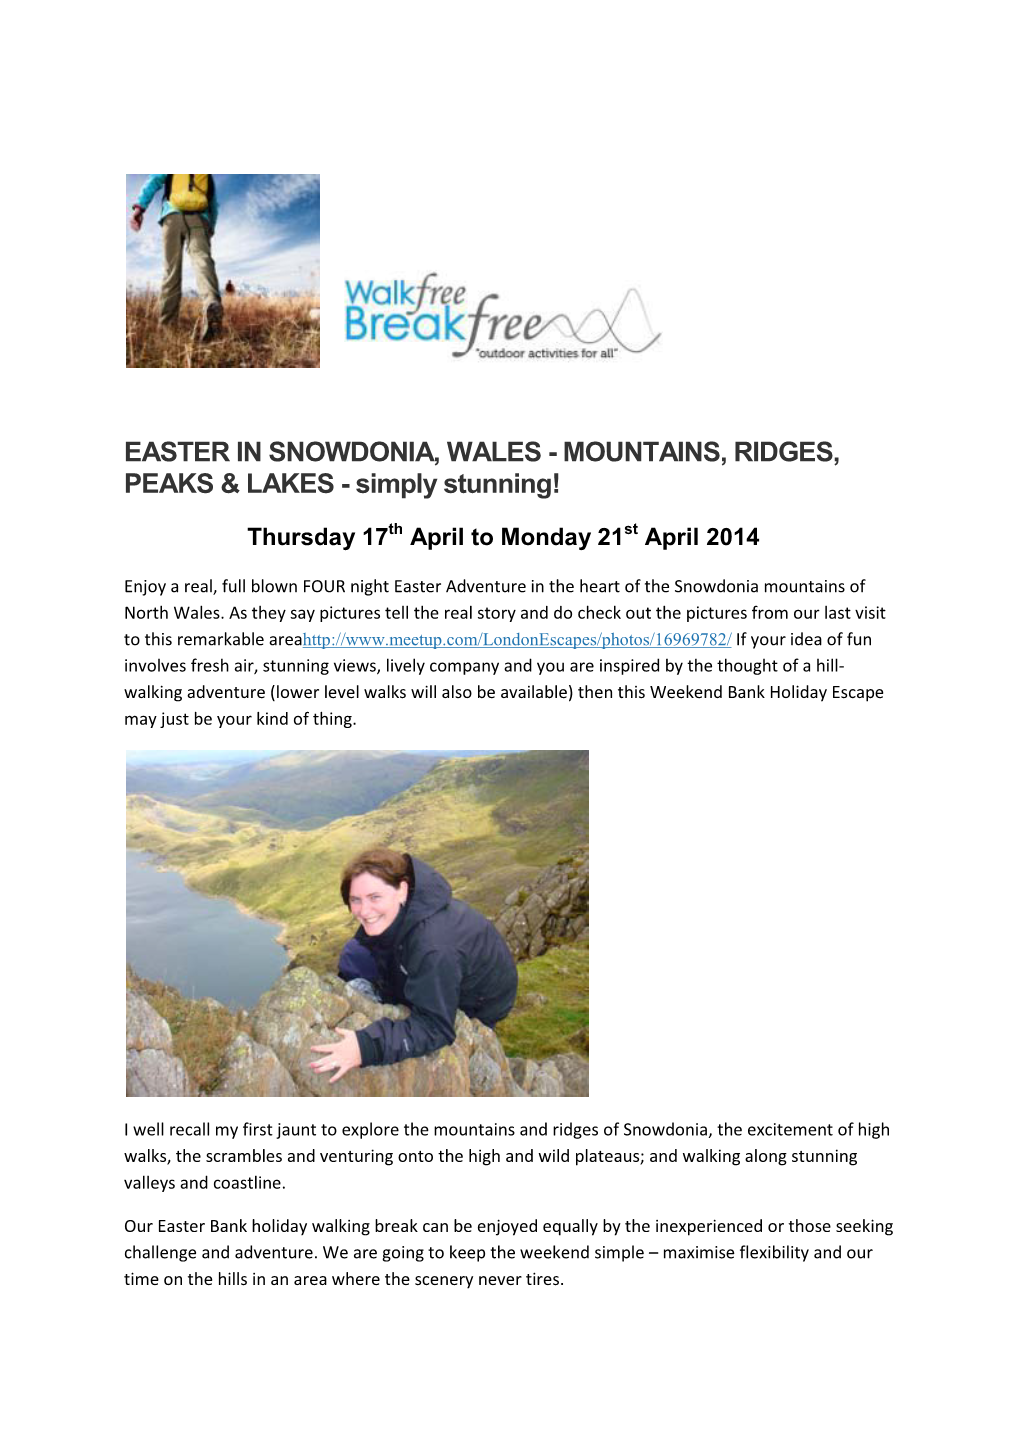 EASTER in SNOWDONIA, WALES - MOUNTAINS, RIDGES, PEAKS & LAKES - Simply Stunning!